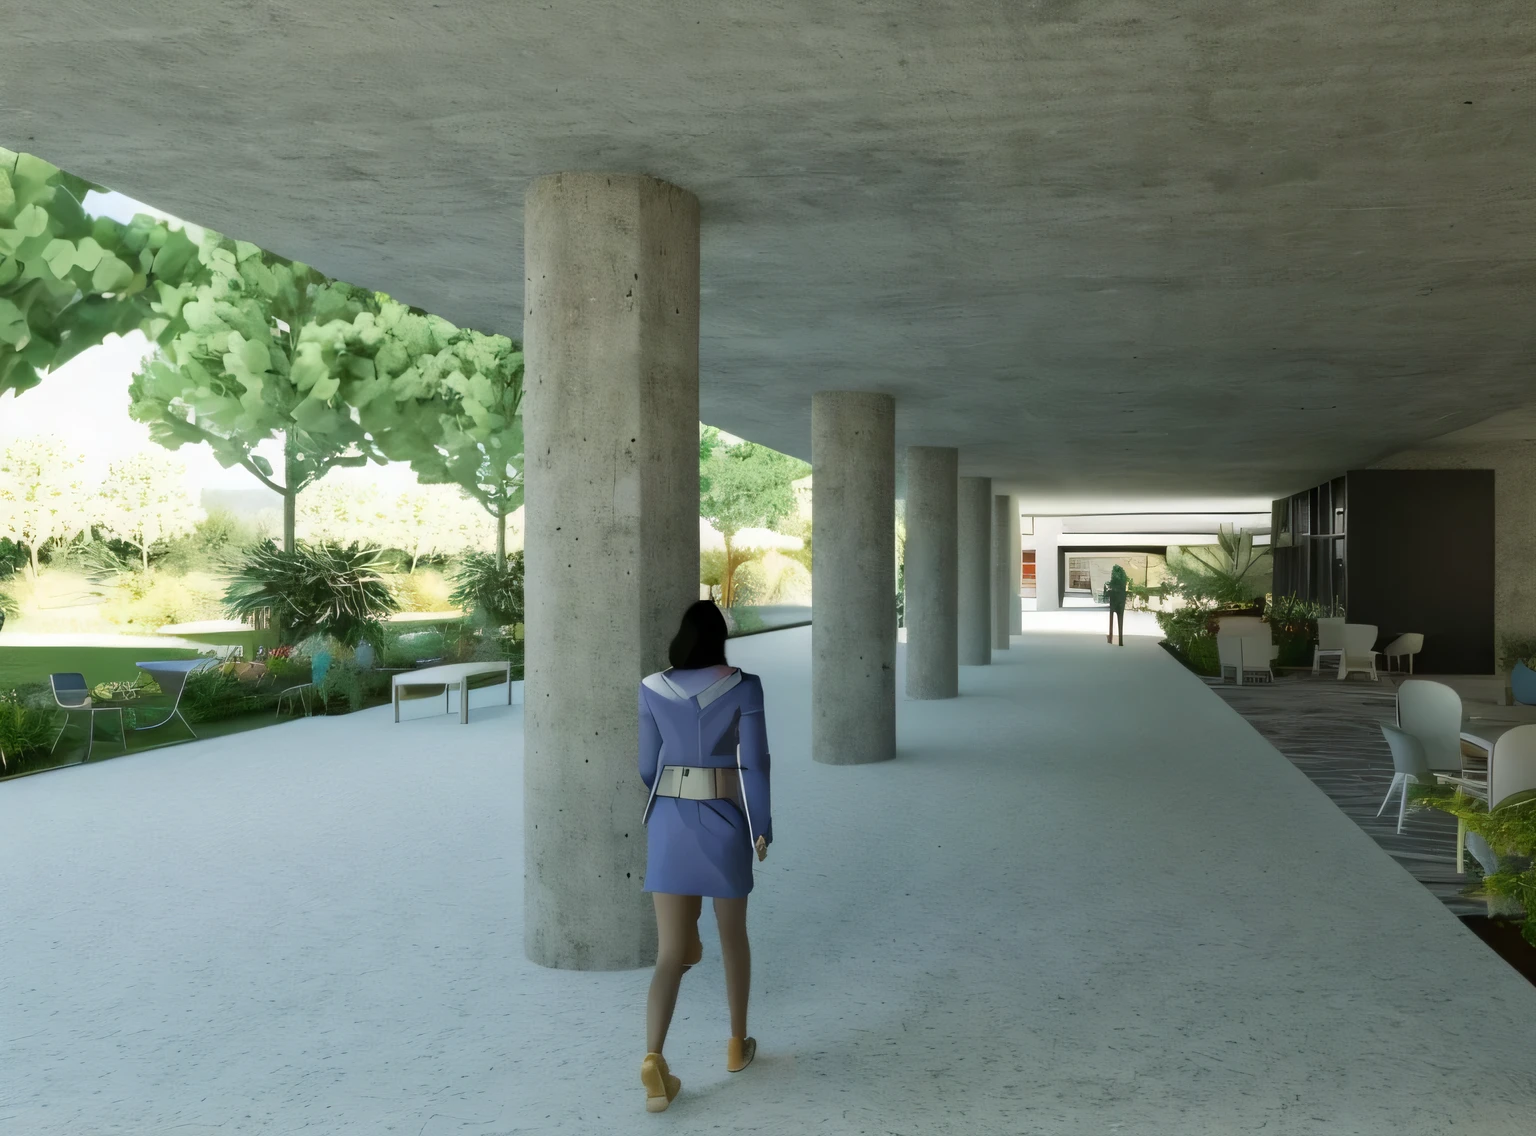 there is a woman walking down the walkway of a building, pilares de concreto, architectural rendering, architectural rendering, interior de concreto hitech, professional rendering, low angle dimetric Rendering, Rendering, detailed Rendering, photographic rendering, detail rendering, architectural visualization, architectural visualization, view at ground level, ground level view, Realistic rendering, semi - Realistic rendering, digital Rendering